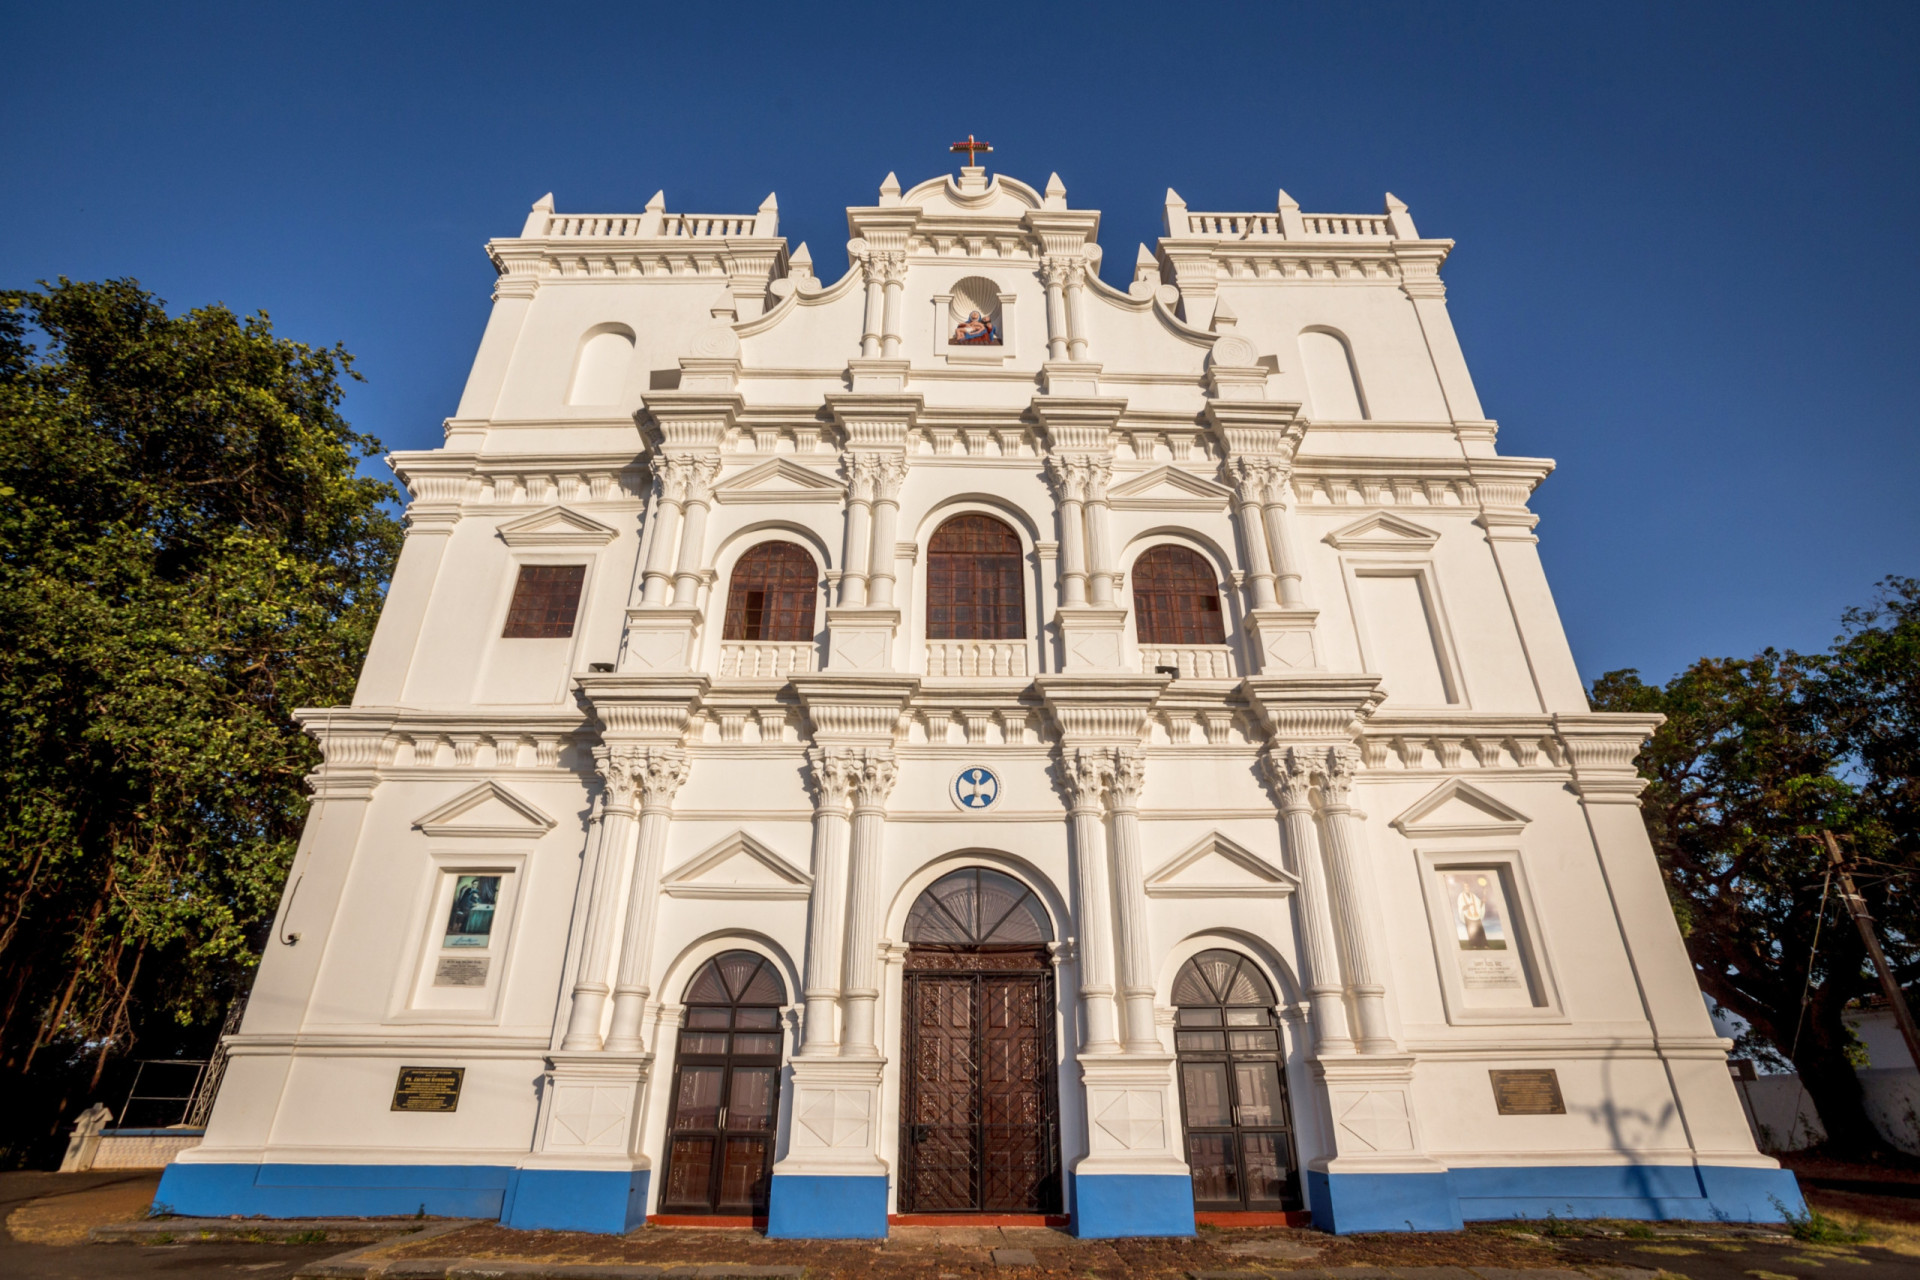 <p>Similarly, historic Indo-Portuguese architecture characterizes Divar Island in Goa. For example, the village of Piedade, which means "pity" or "compassion" in Portuguese, is where the early 18th-century Church of Our Lady of Compassion is located.</p><p><a href="https://www.msn.com/en-my/community/channel/vid-7xx8mnucu55yw63we9va2gwr7uihbxwc68fxqp25x6tg4ftibpra?cvid=94631541bc0f4f89bfd59158d696ad7e">Follow us and access great exclusive content every day</a></p>